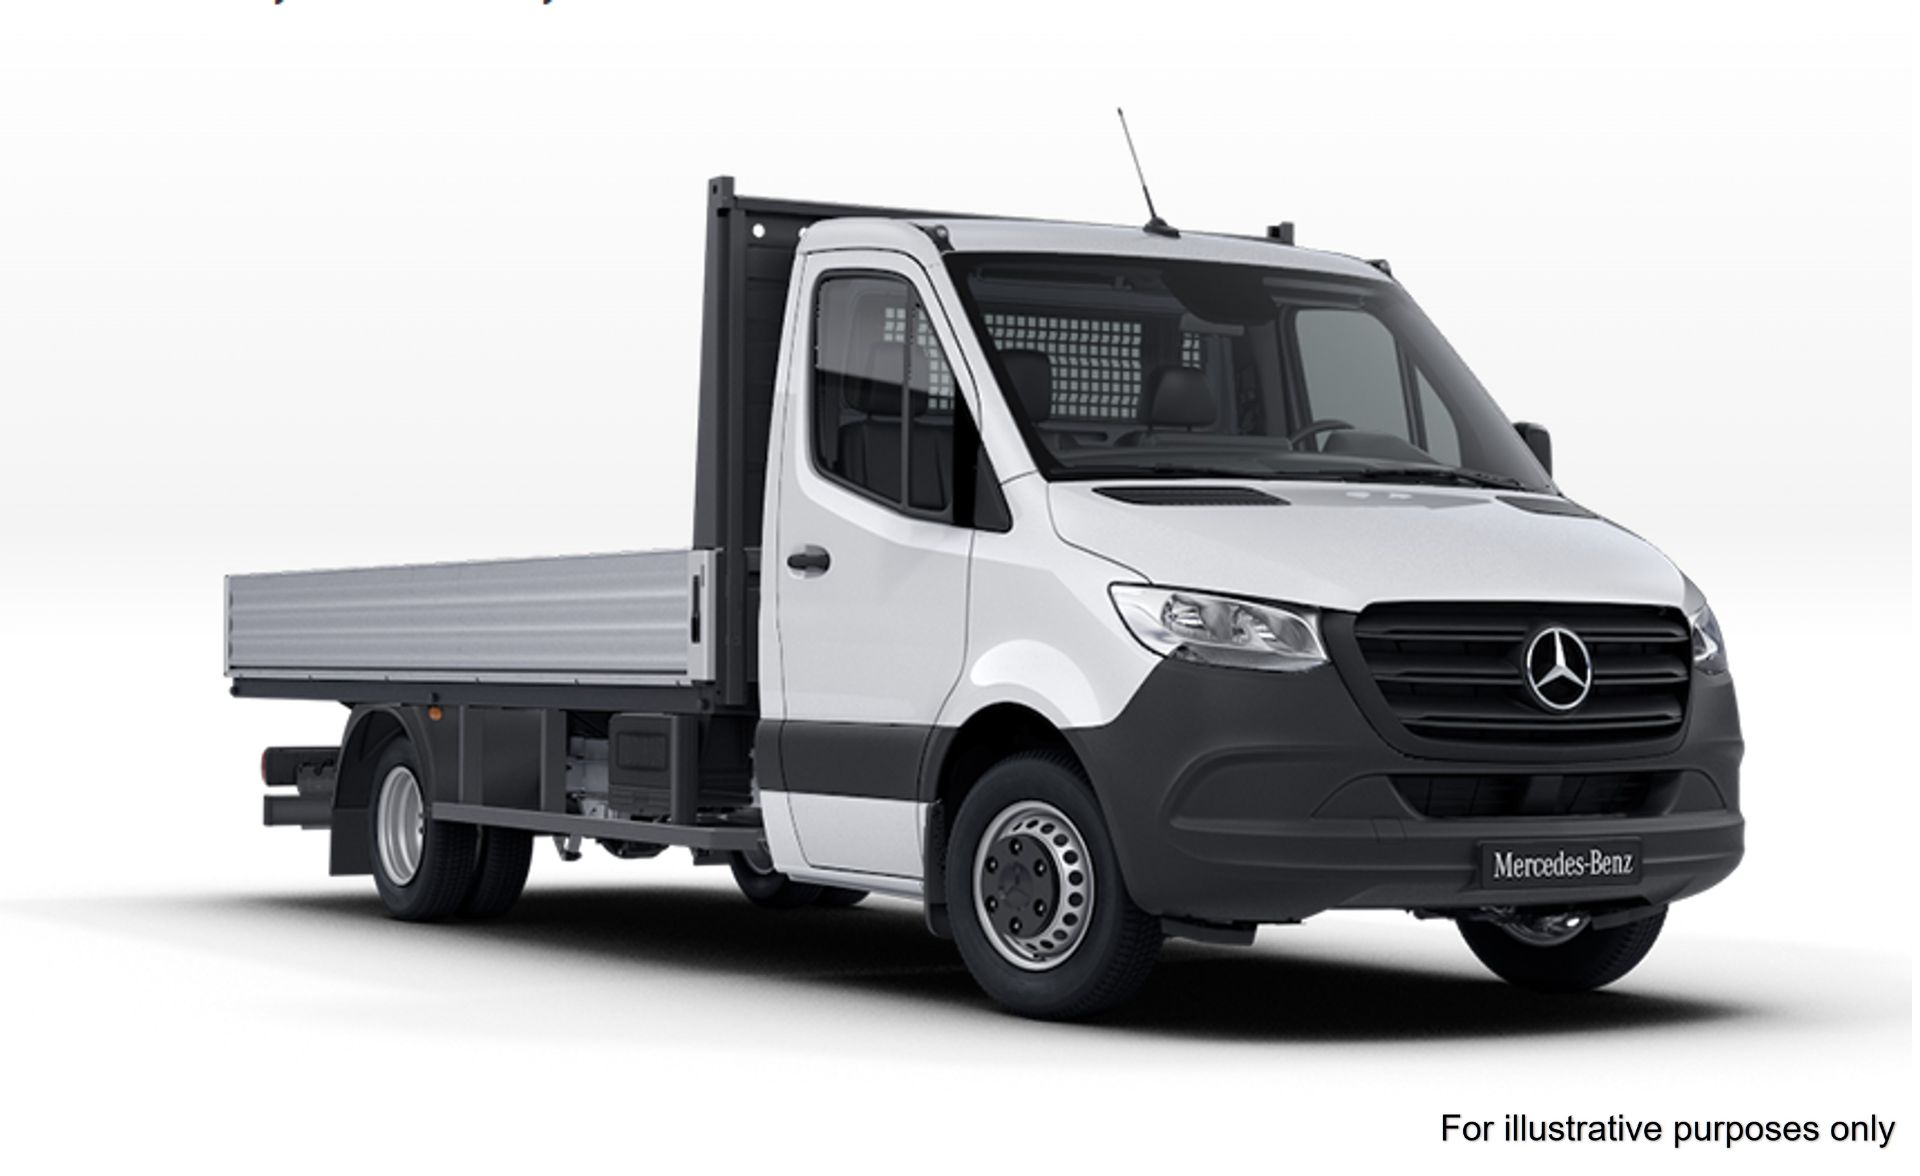 2019 Mercedes-Benz Sprinter 3.5T Chassis Cab (KM69XEB)